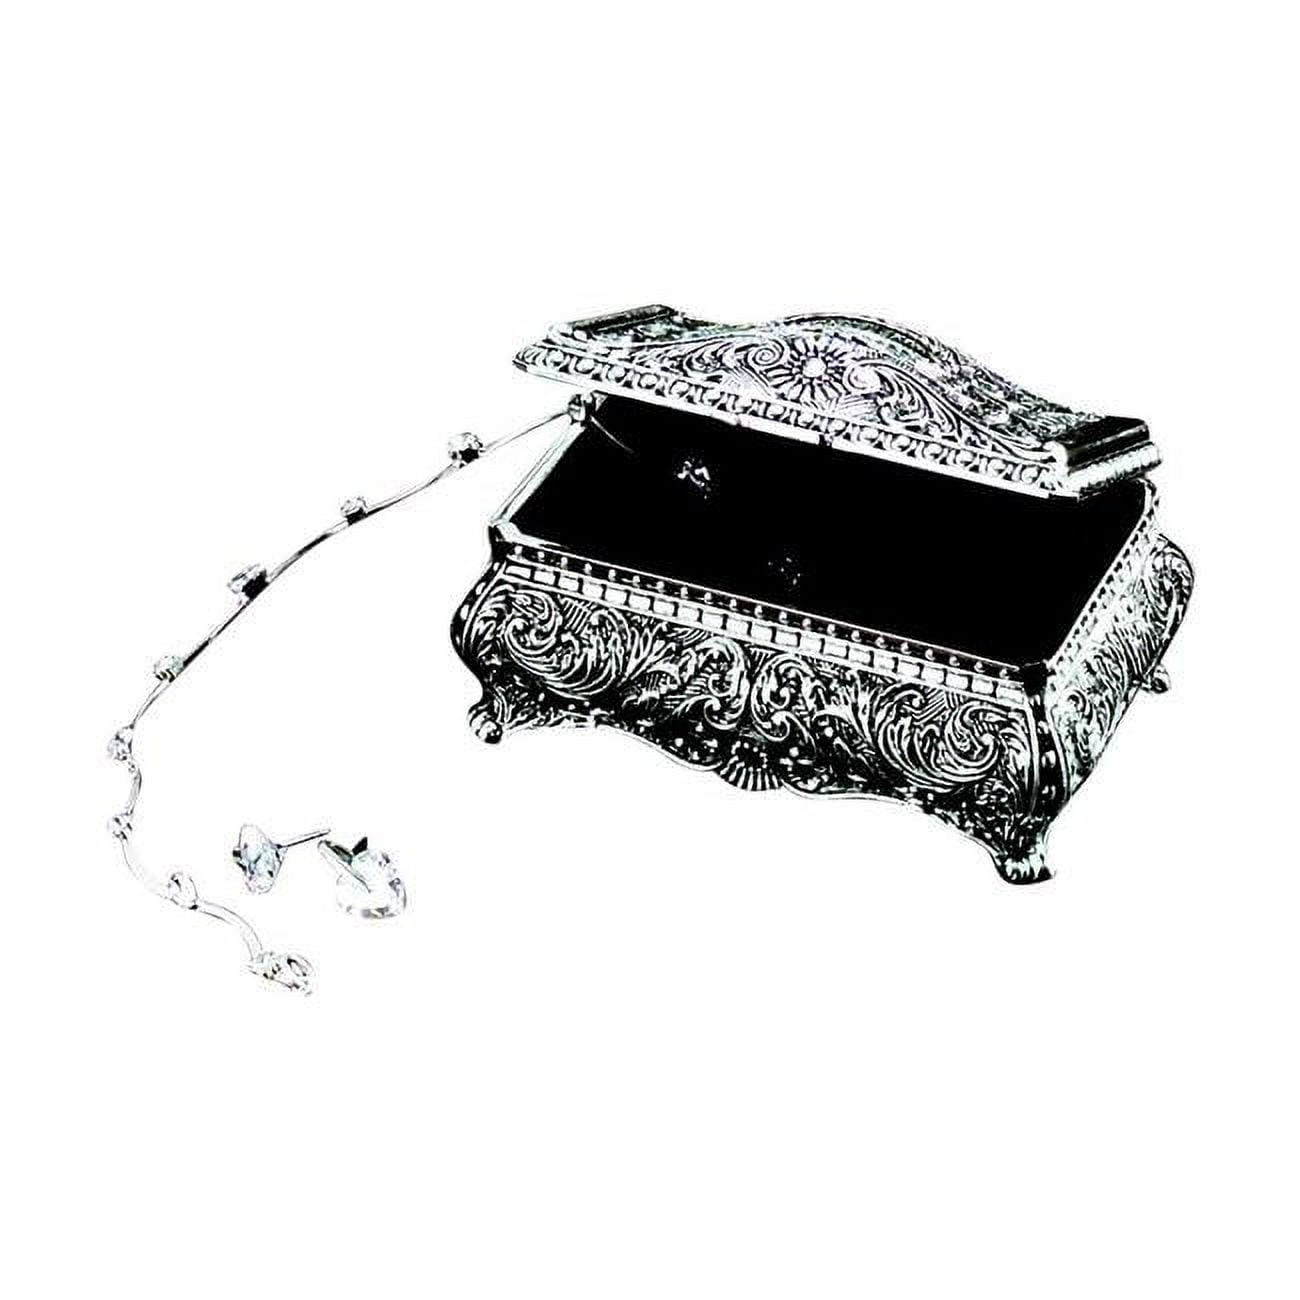 026170 1.875 X 2.25 In. Ornate Rectangular Box - Silver Plated